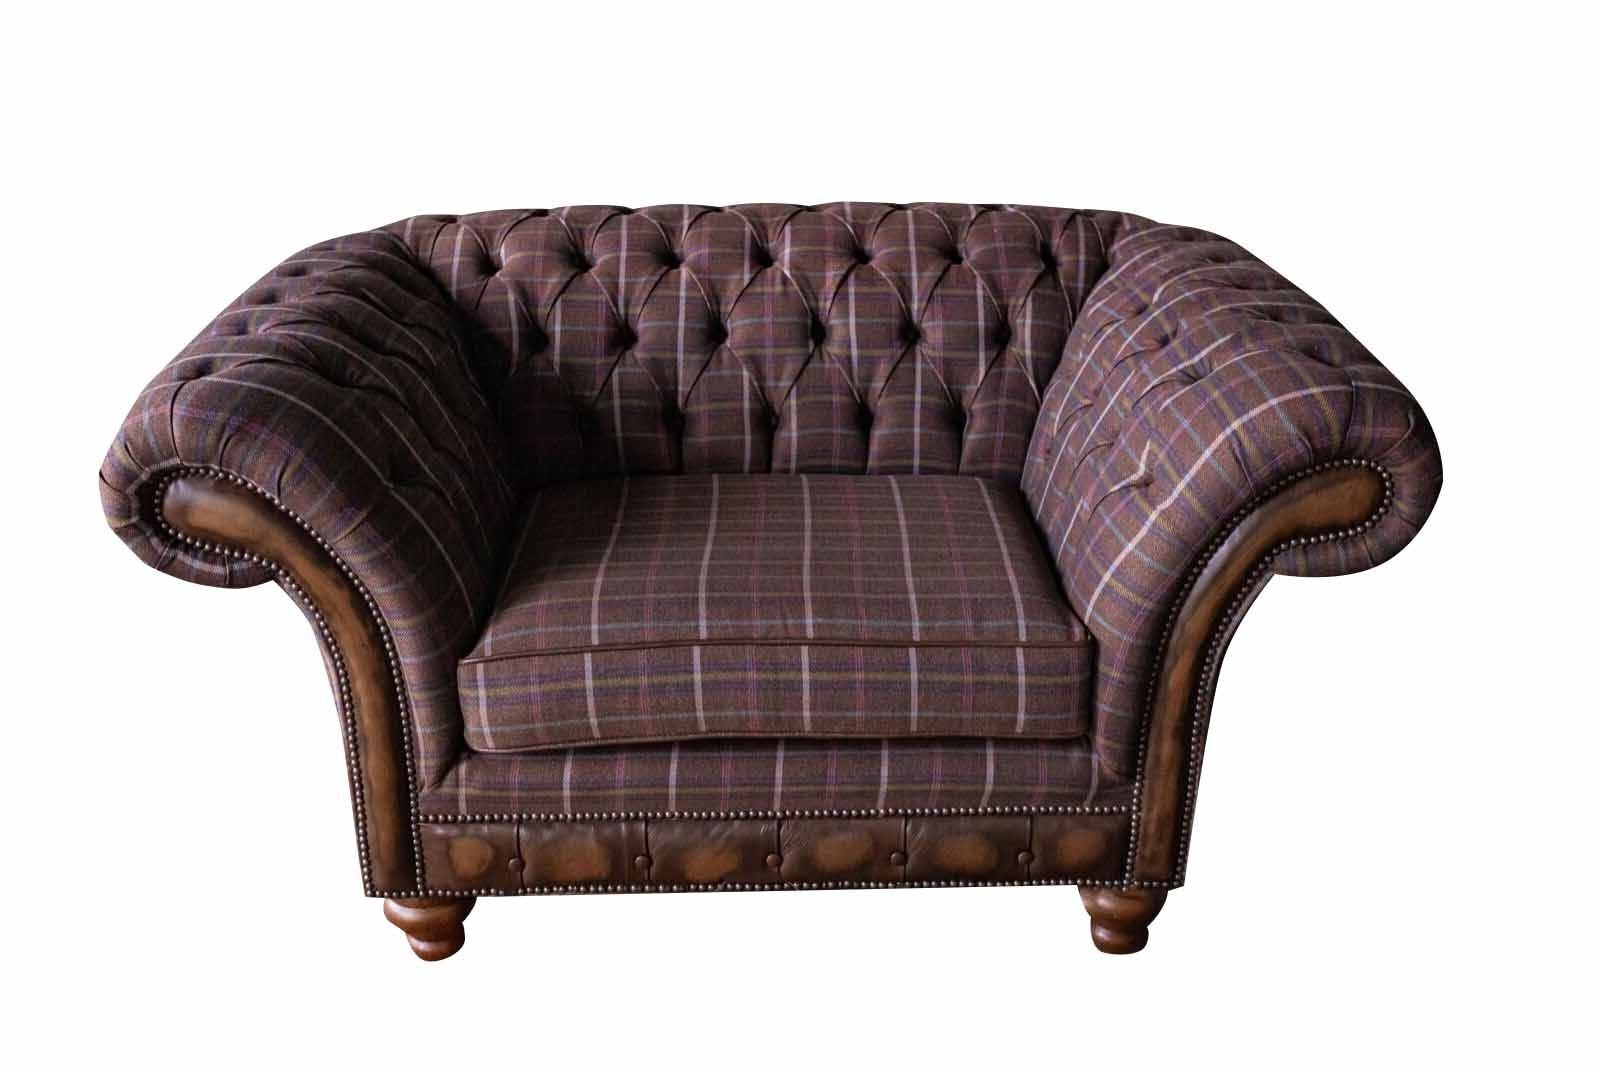 Sessel, Stoff Sitzer Sitz JVmoebel Textil Couch Brauner Europe Sessel Made 1 Chesterfield Polster in